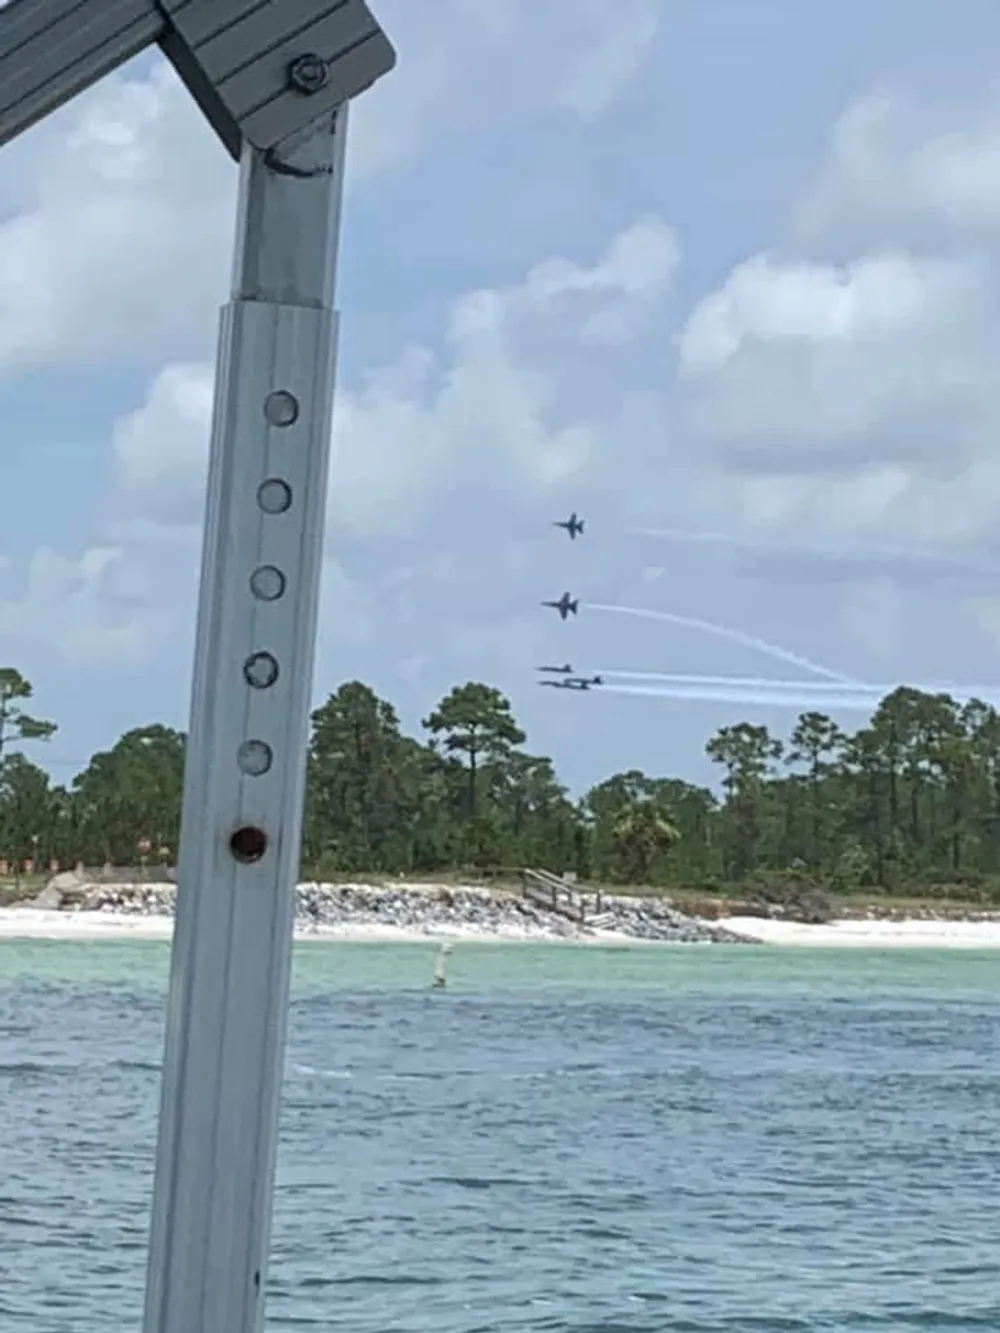 Jets are flying in formation against a cloudy sky over a body of water with a beach and vegetation visible in the background seen from under a structure with a metal beam in the foreground